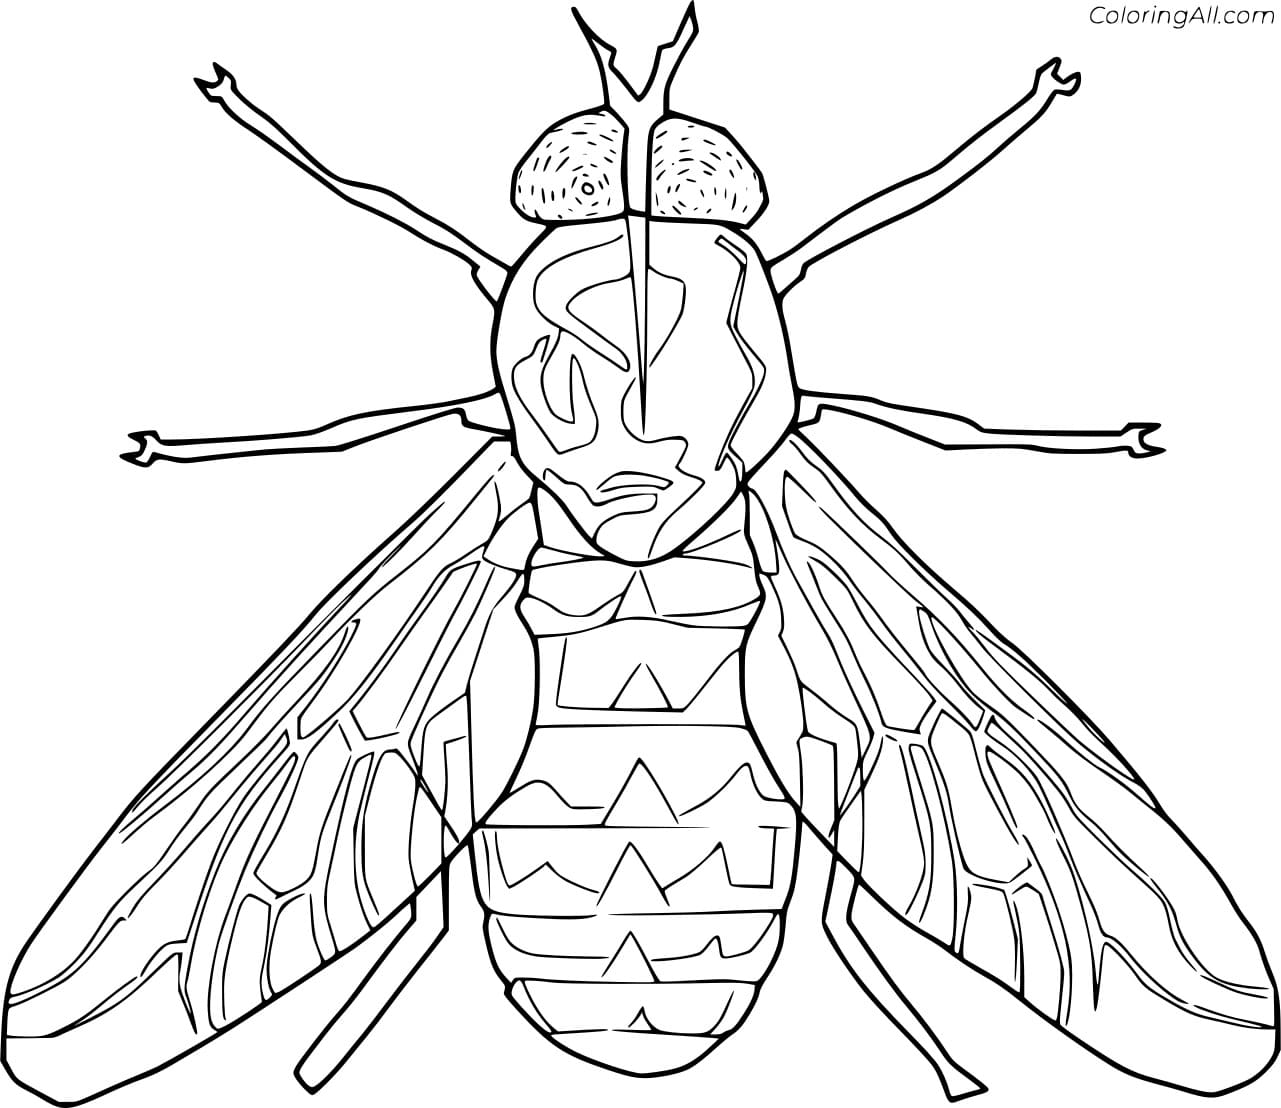 Flesh Fly Image Coloring Page